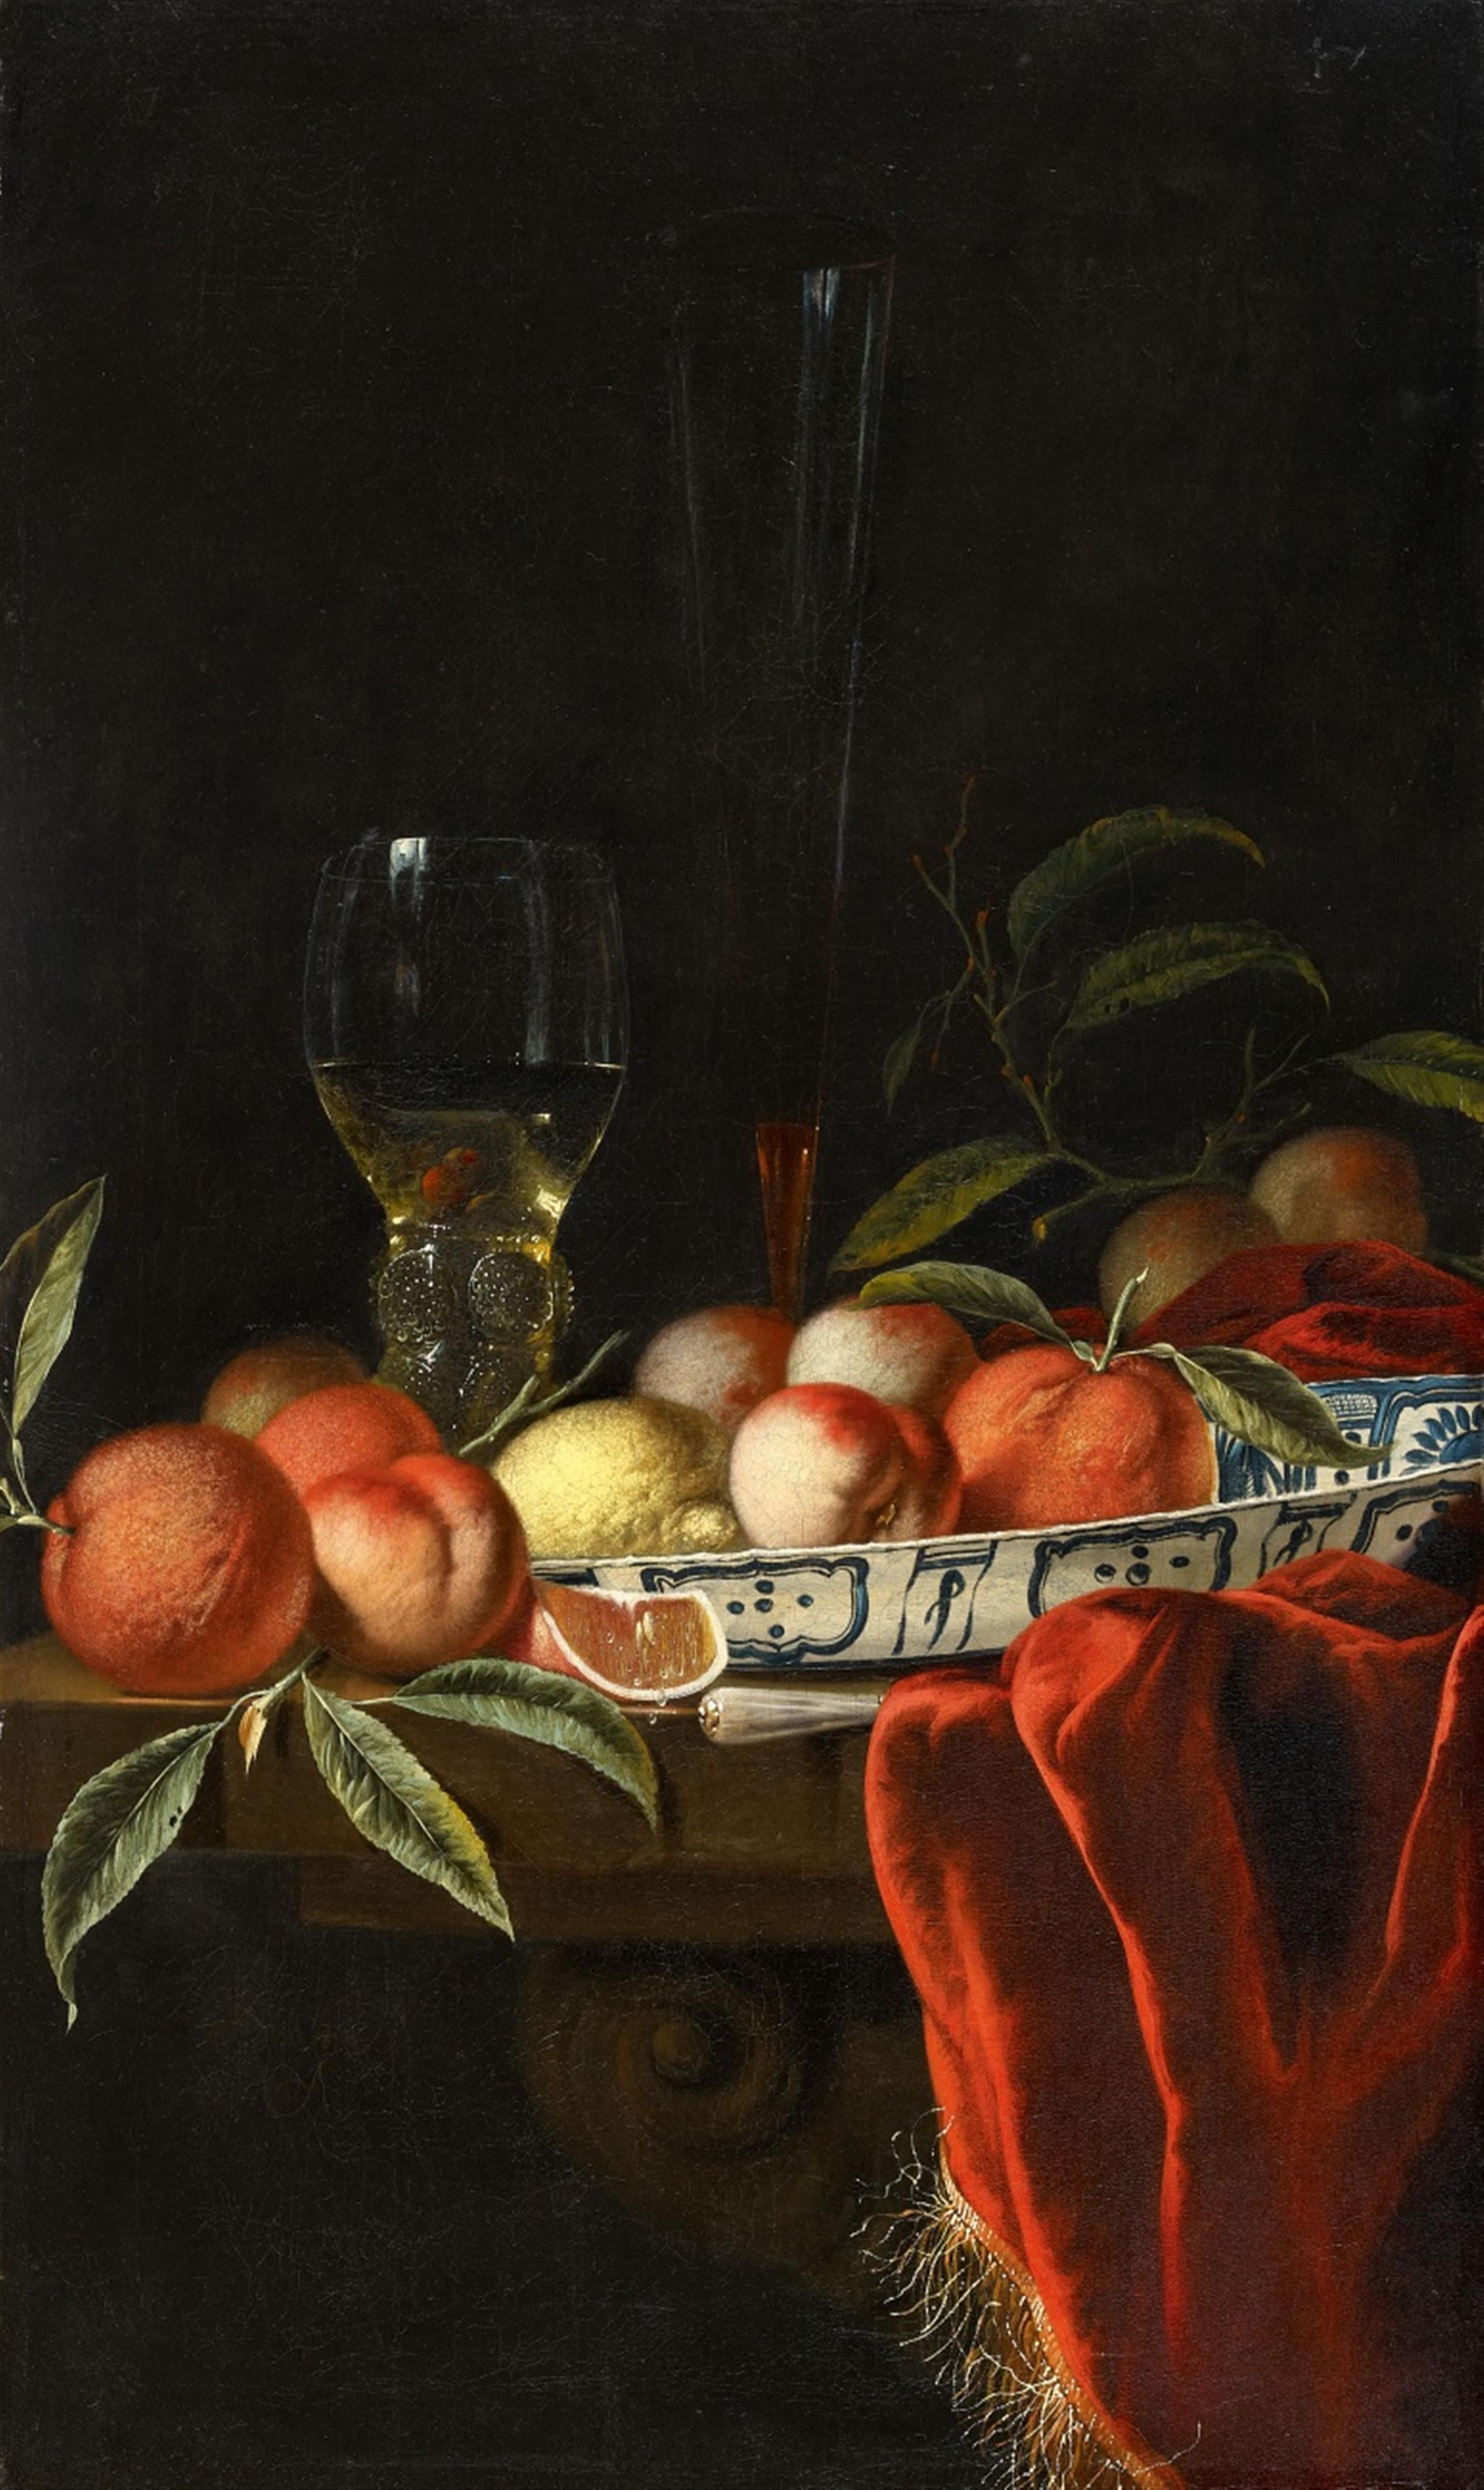 Hendrik van Streek - Still Life with a Rummer, Wine Flute, and a Wanli Bowl Filled with Fruit - image-1